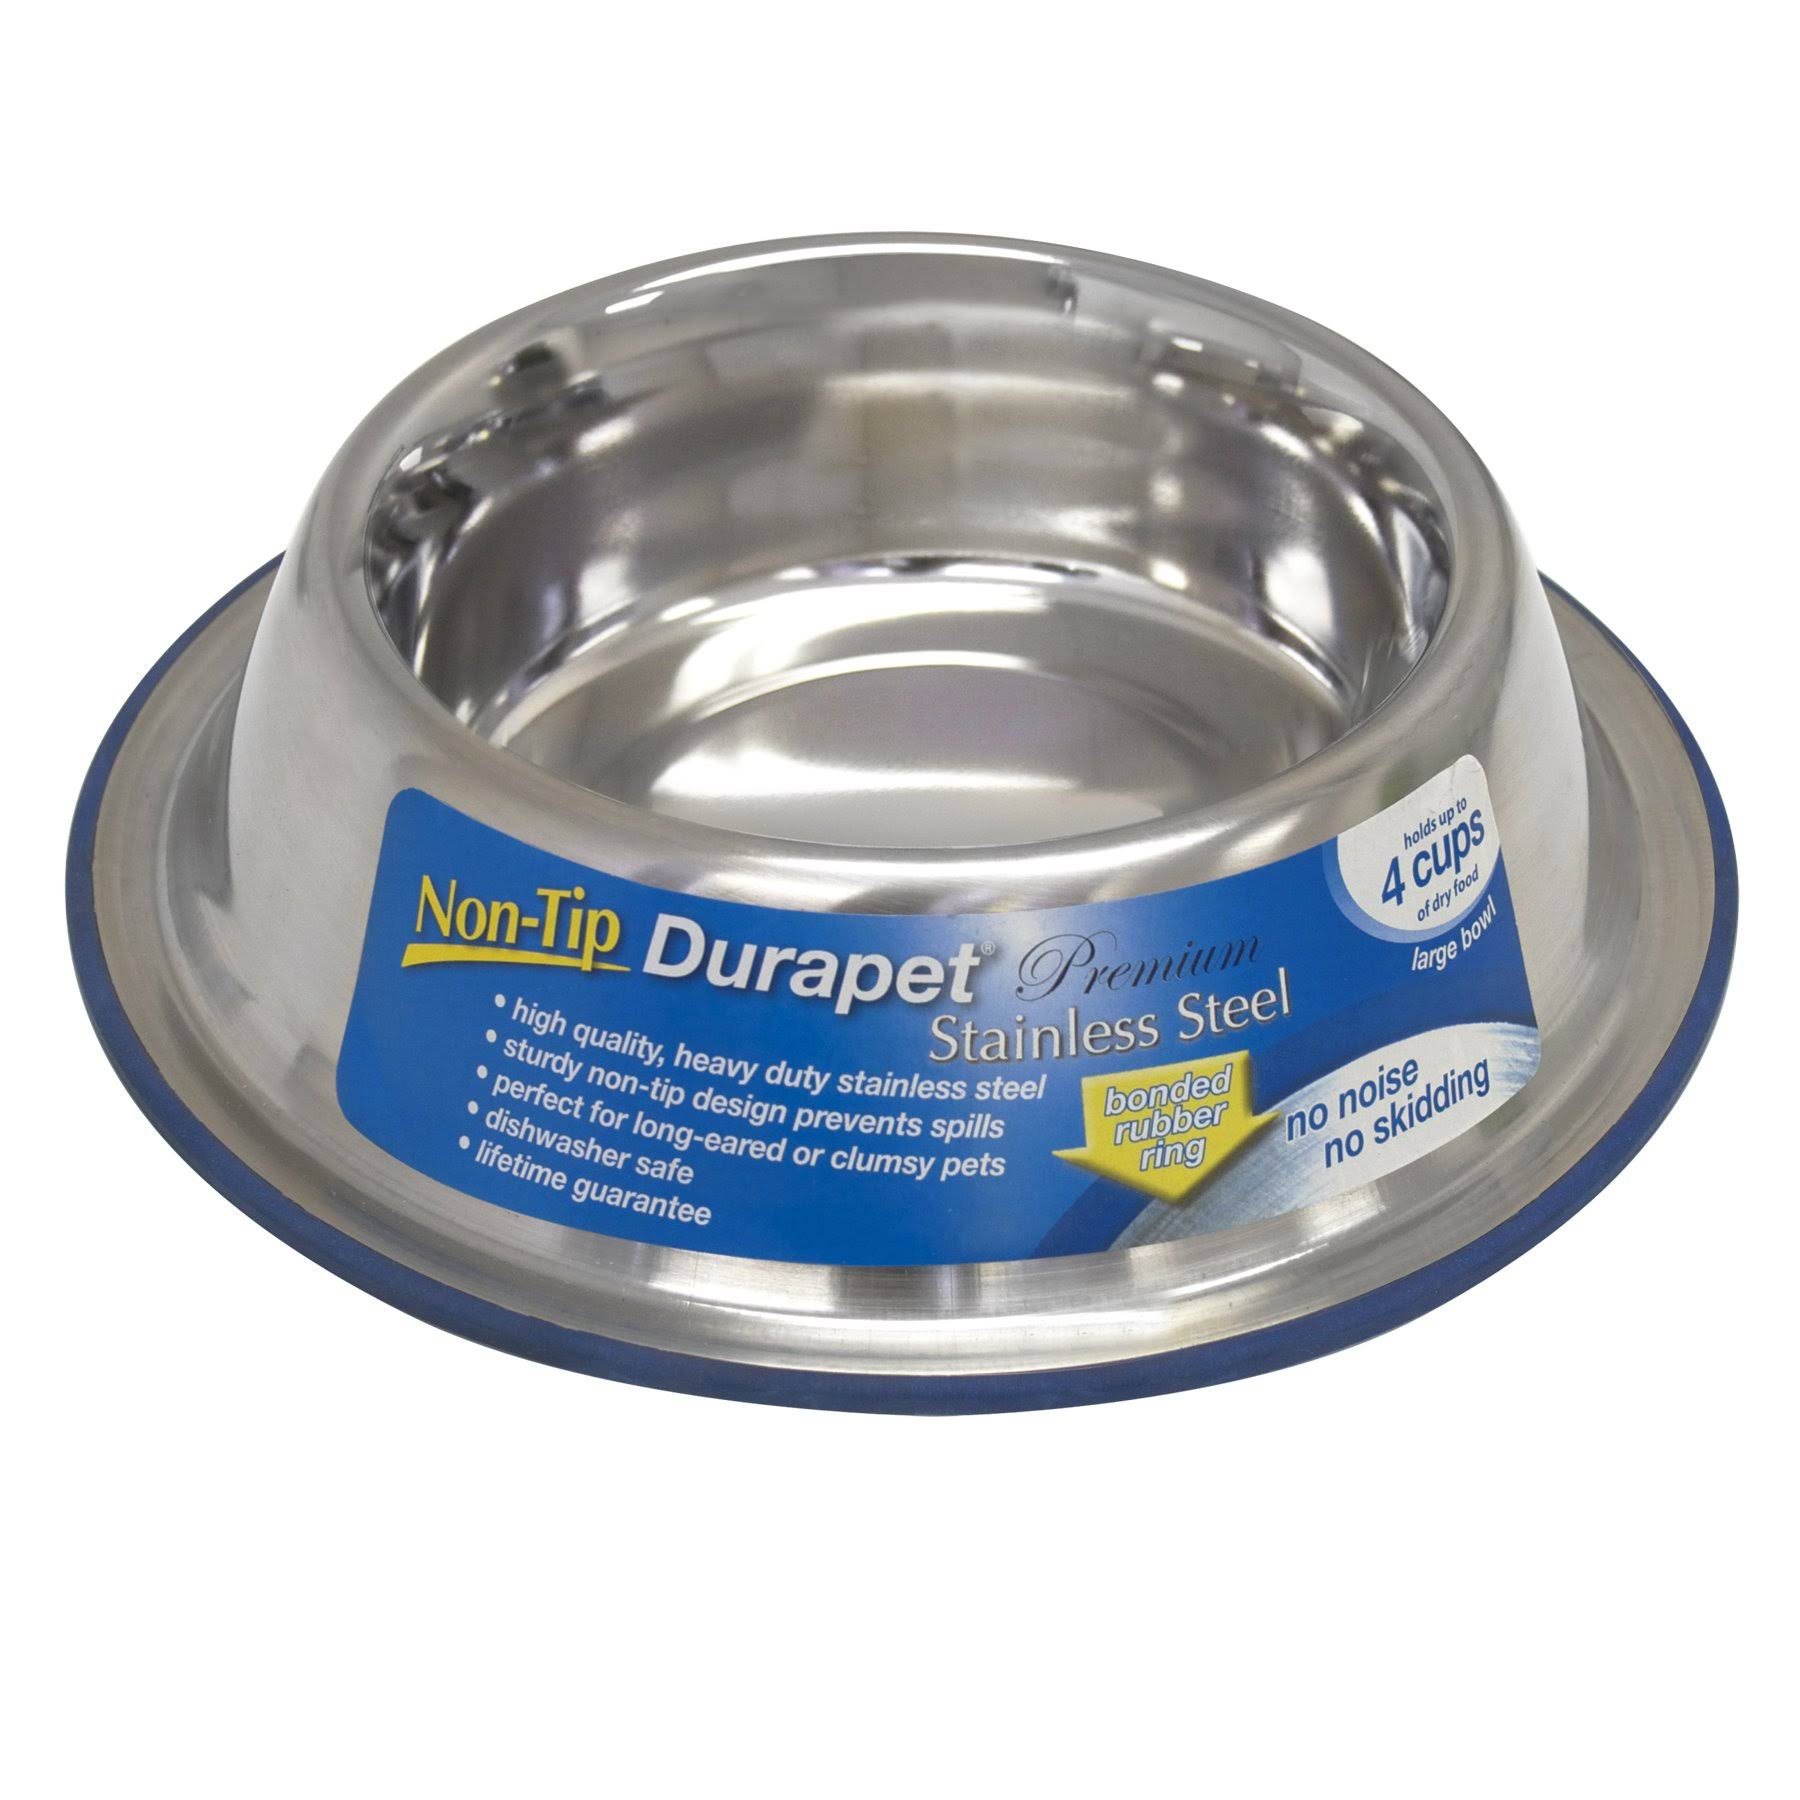 OurPets Durapet Non-Tip Bowl - Large